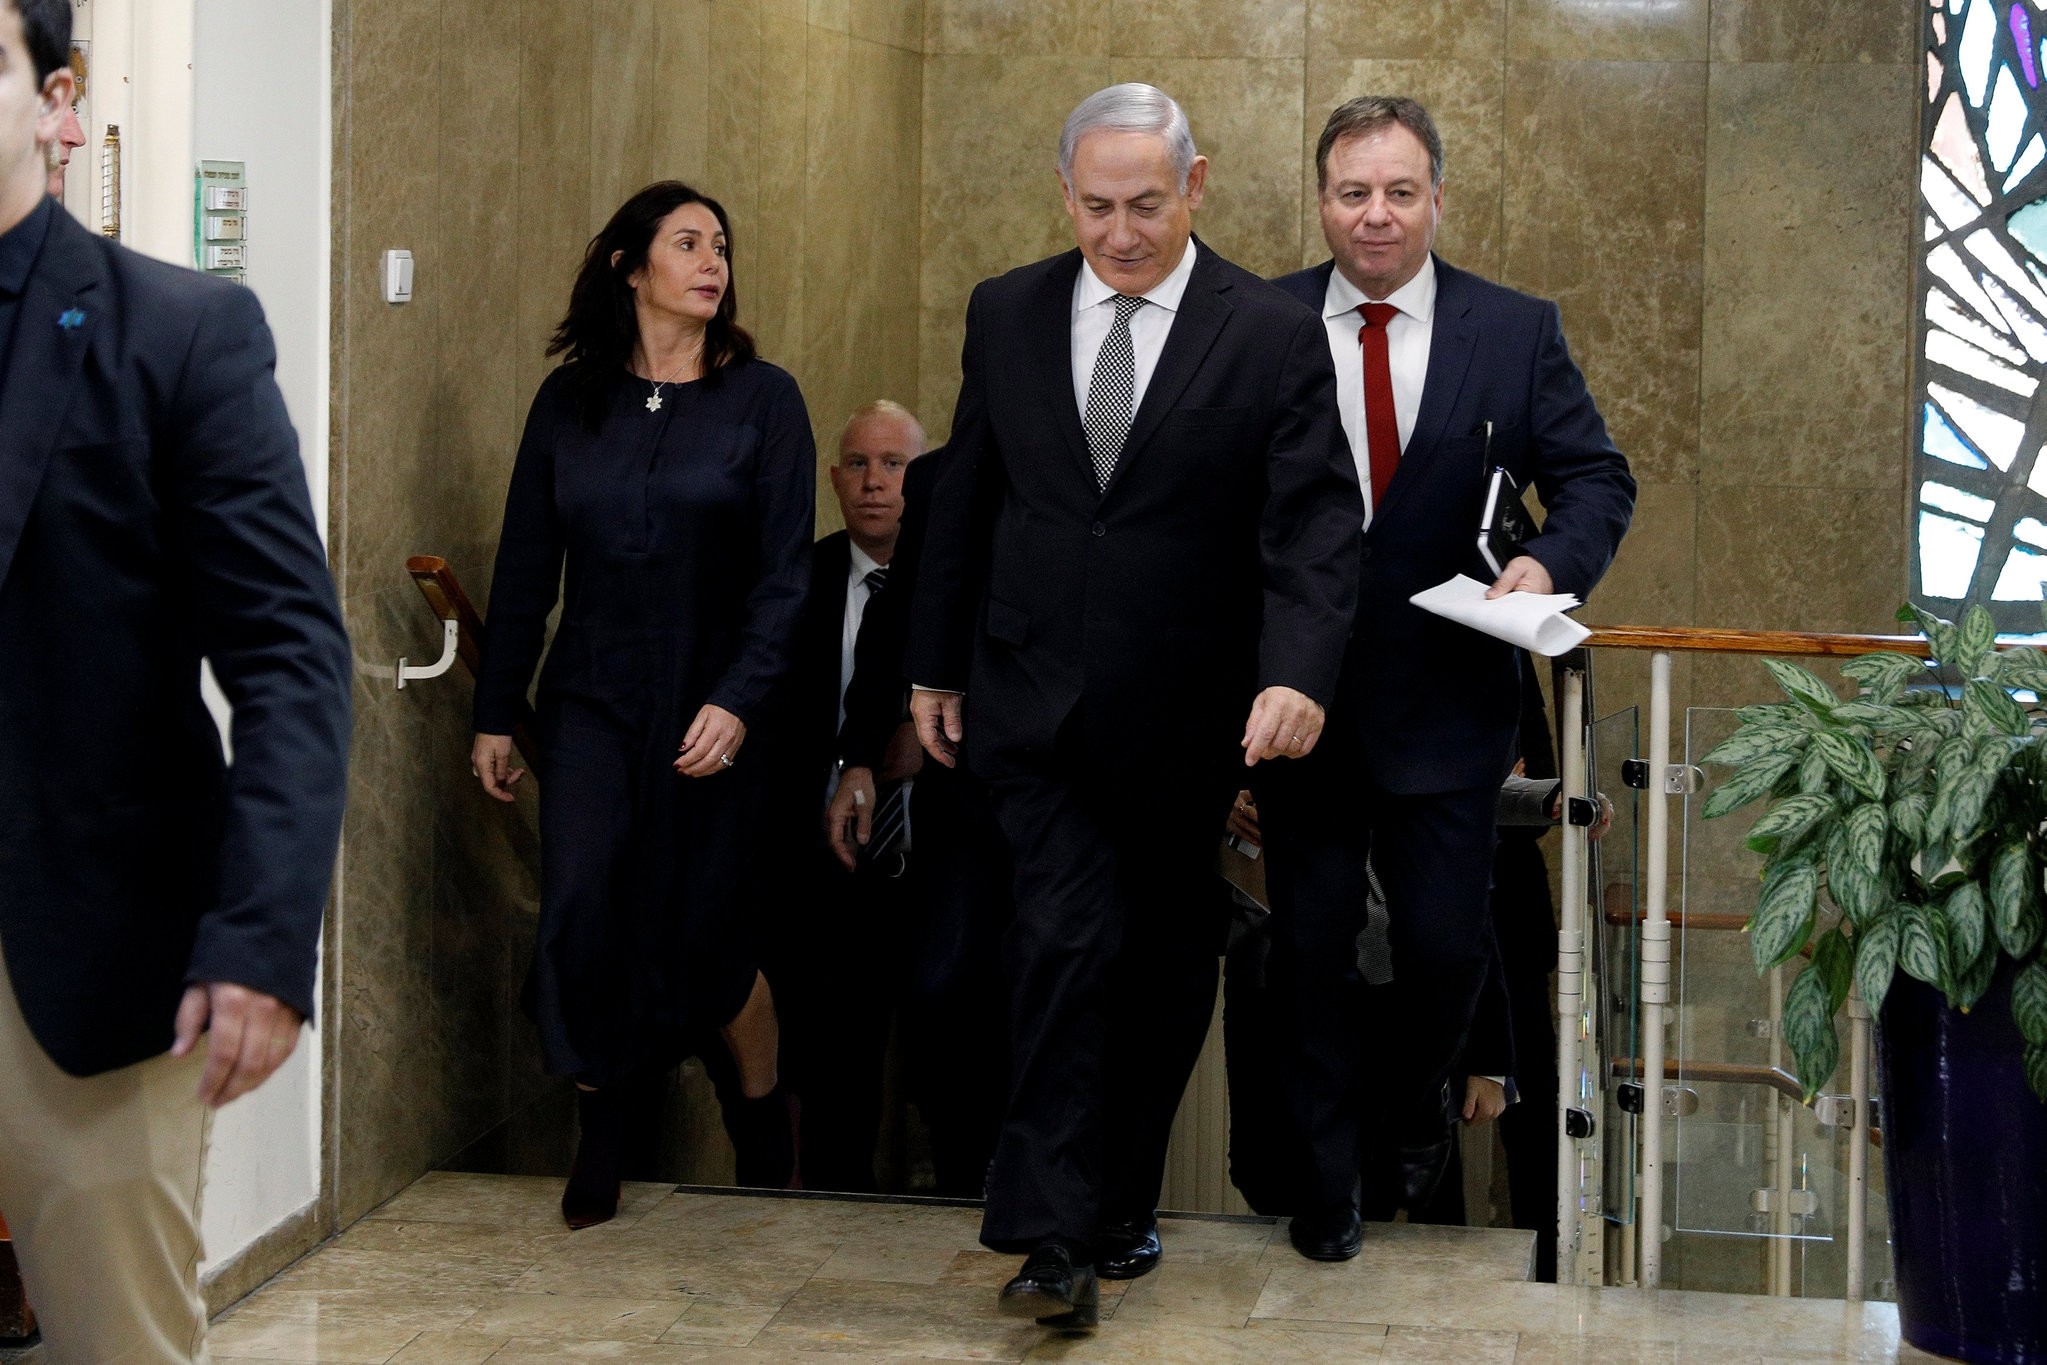 Israeli Prime Minister Benjamin Netanyahu arrives ahead of the weekly cabinet meeting at the Prime Minister's office in Jerusalem, February 25, 2018. (REUTERS Photo)